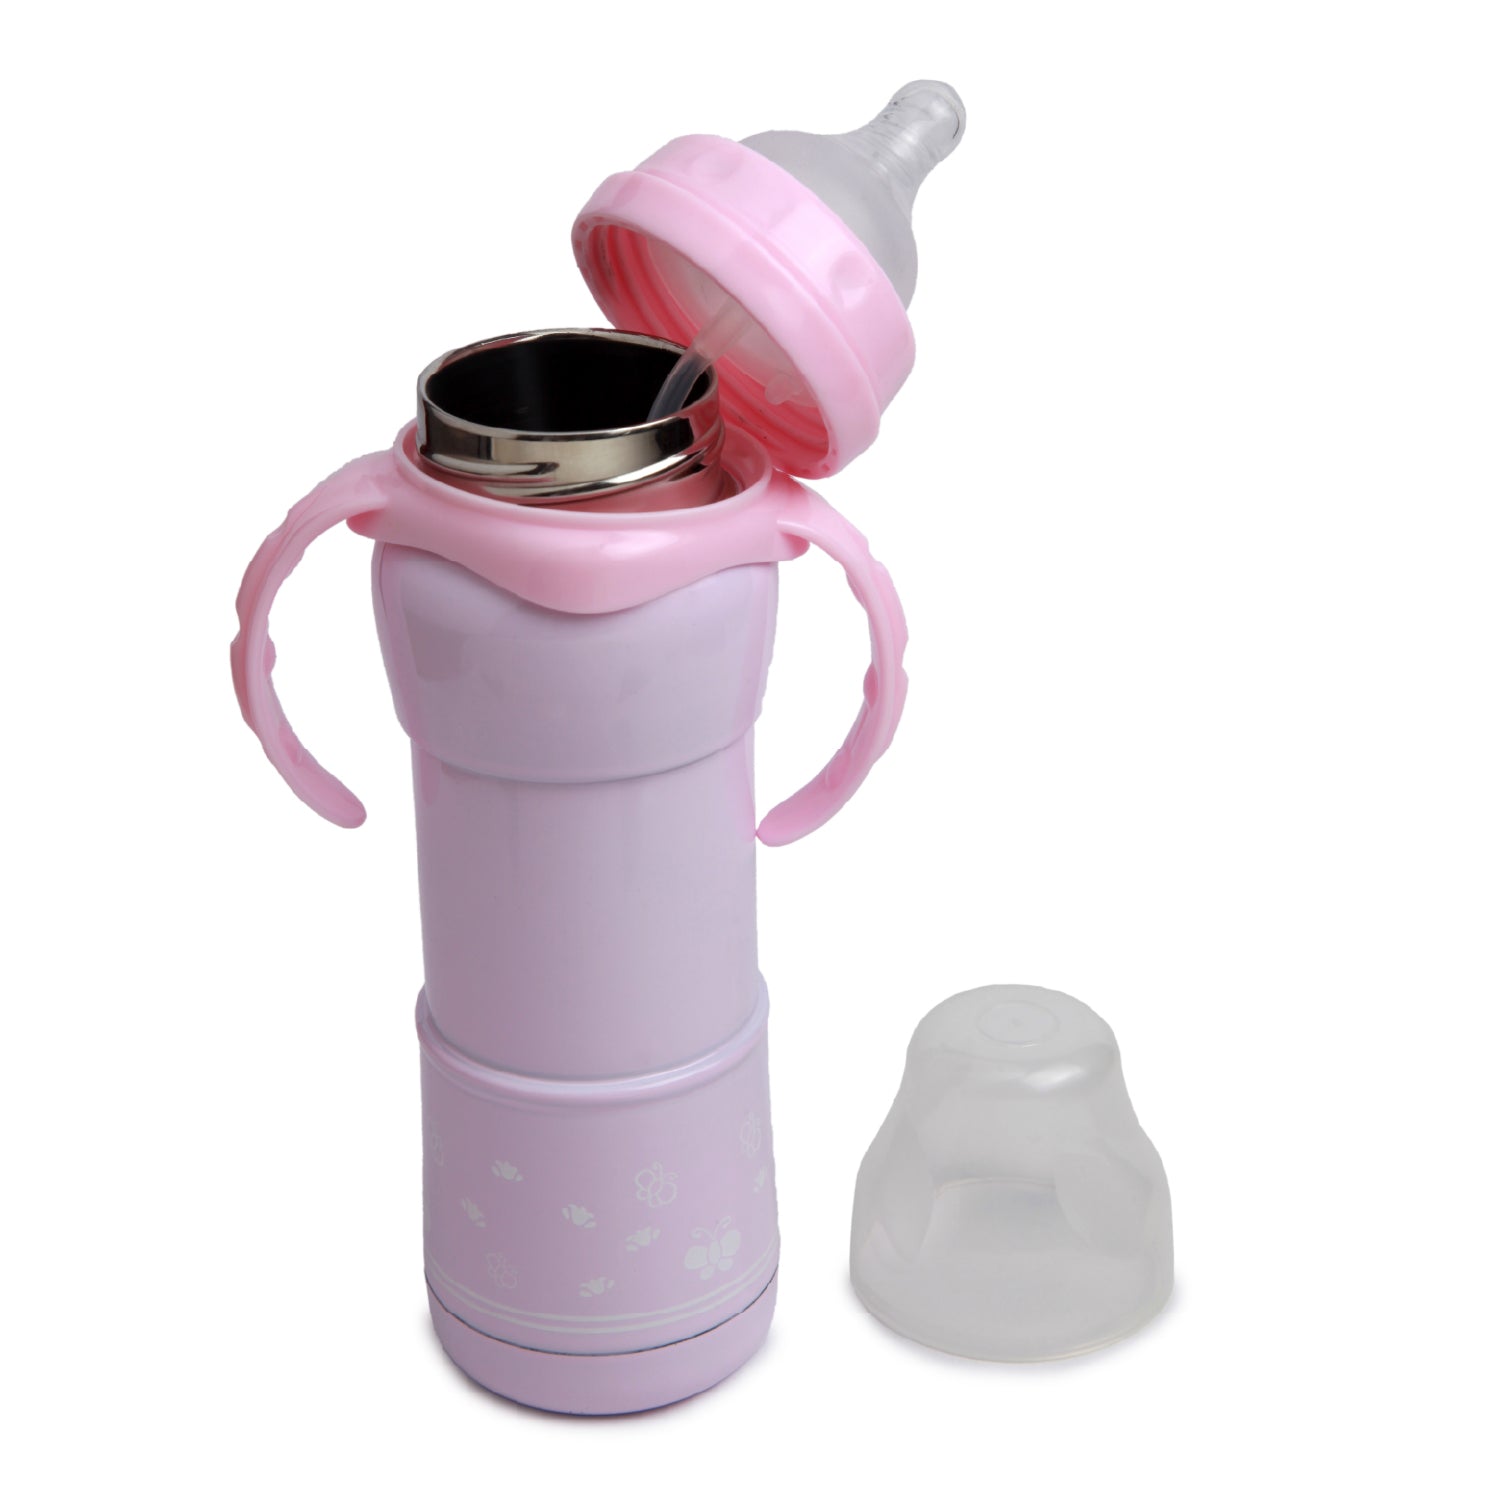 Hold Me With 2 Hands 240 ml Feeding Bottle Pink